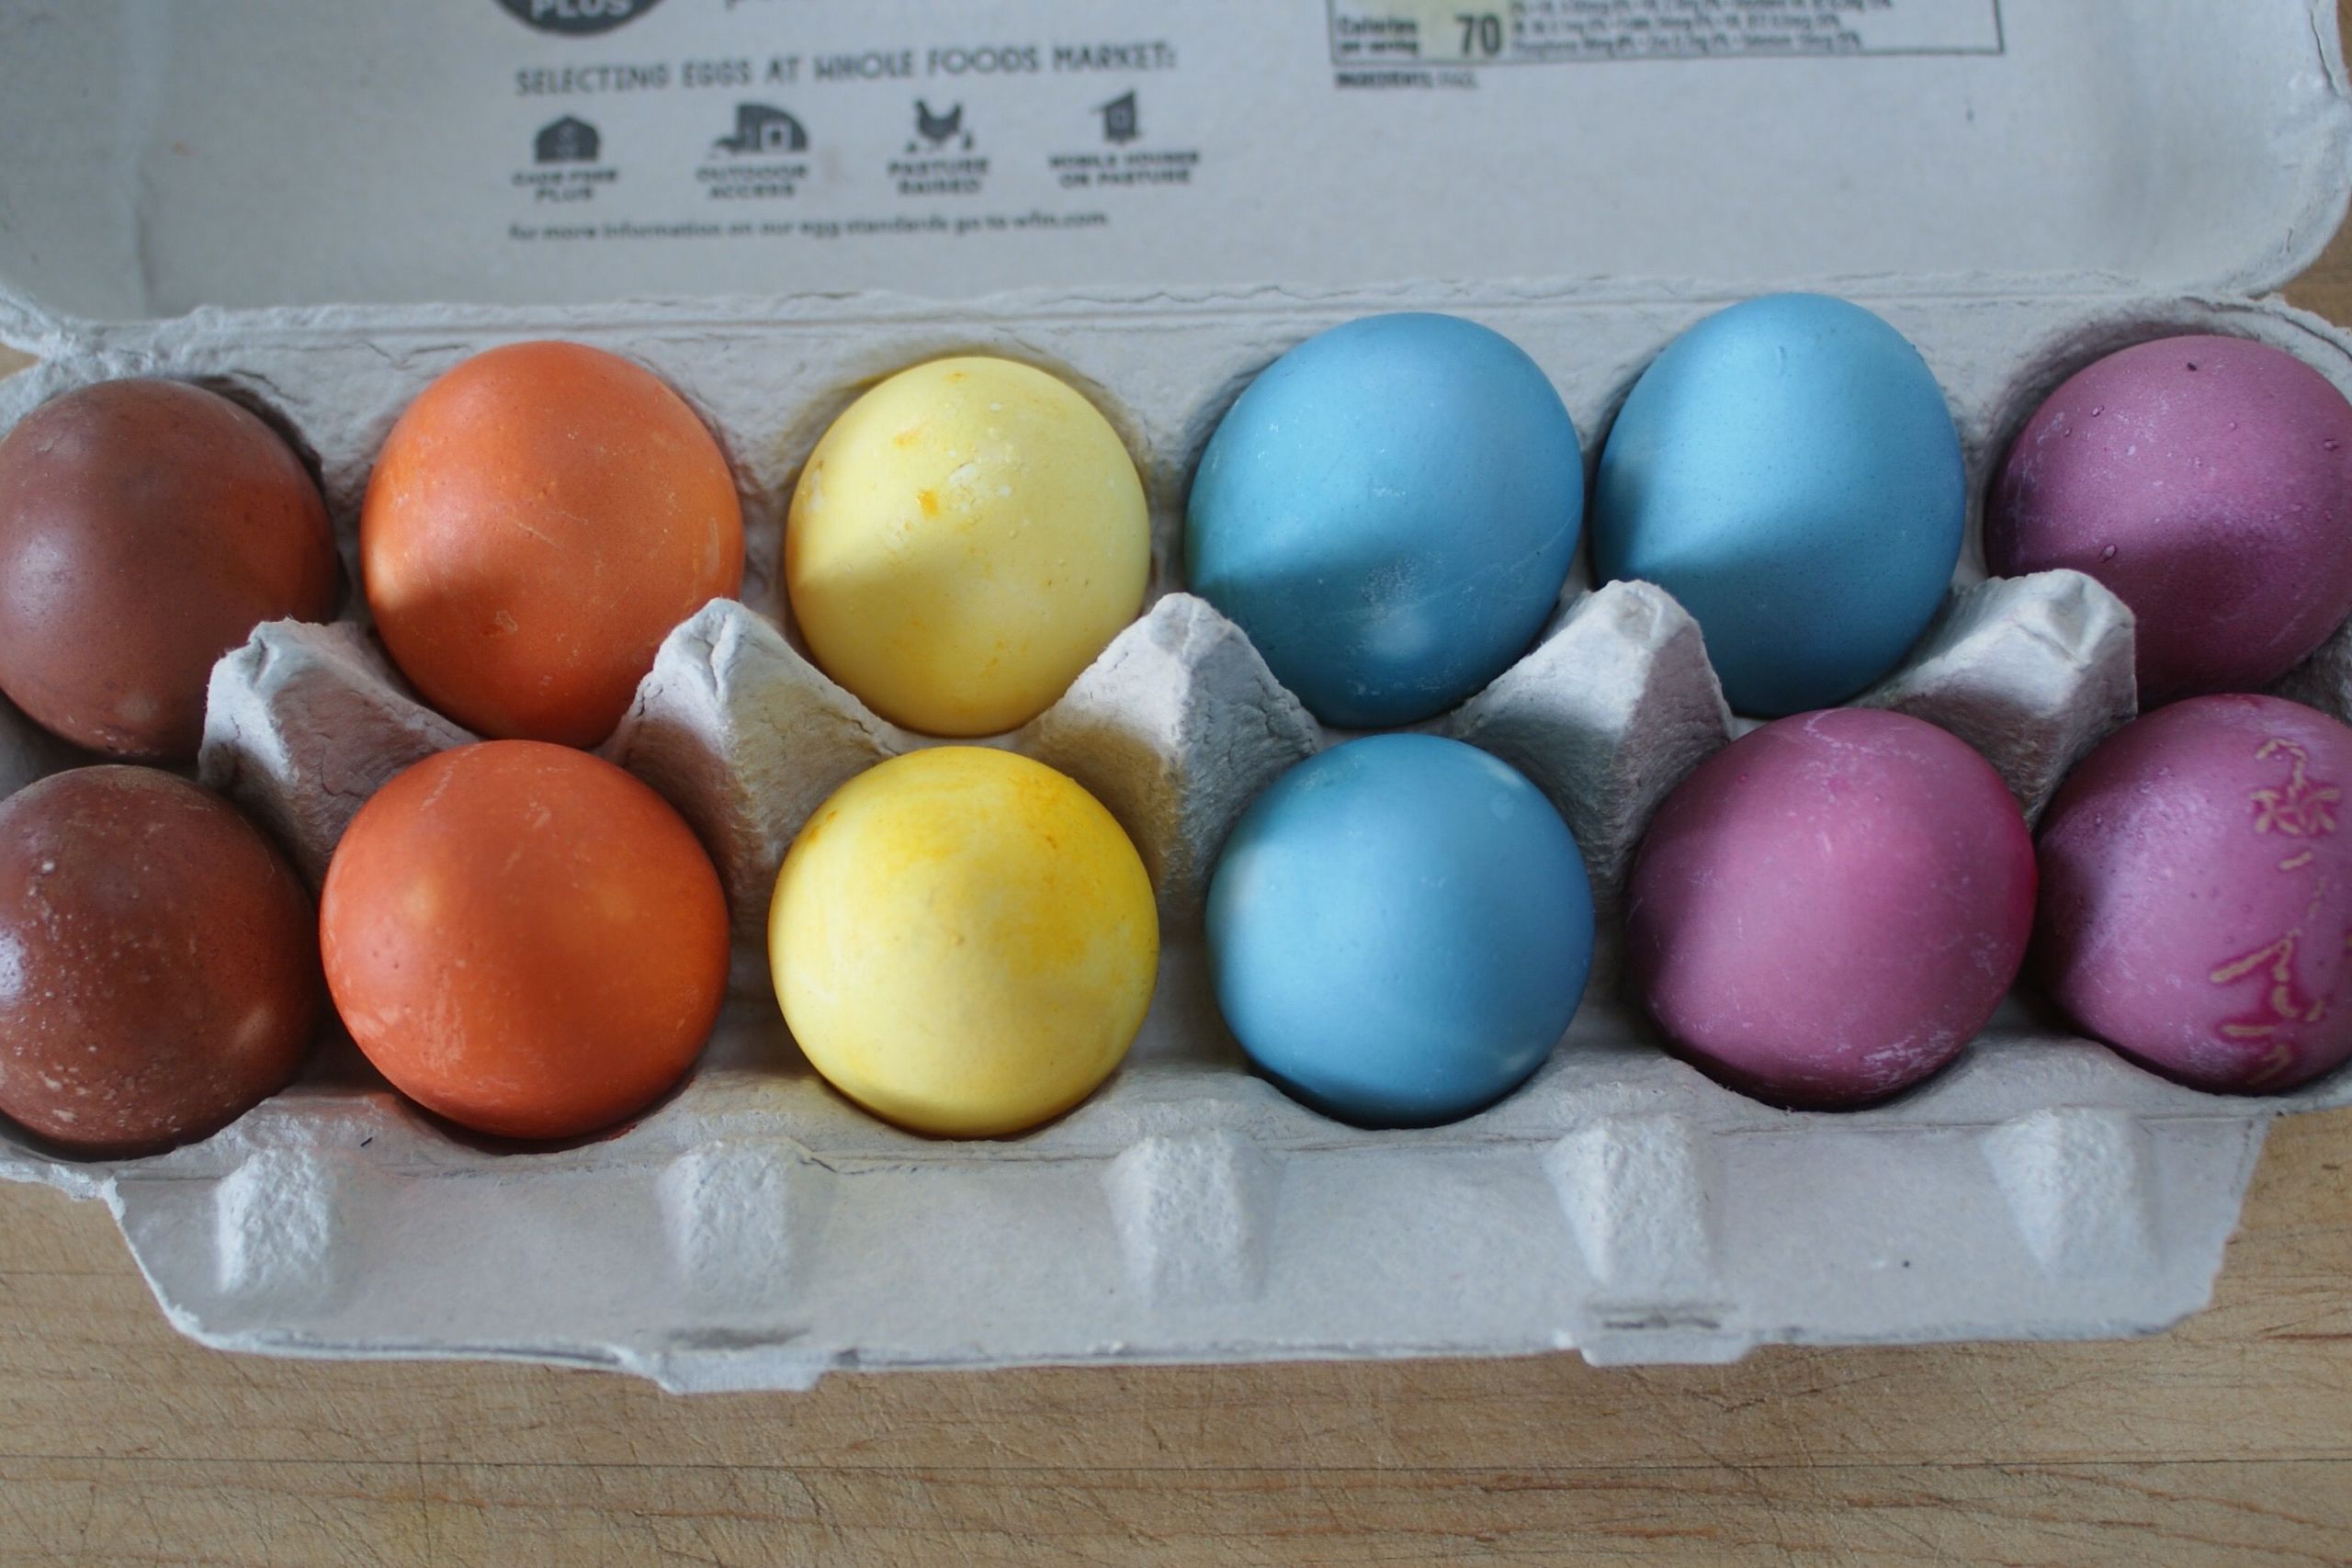 How To Make Easter Egg Dye With Food Coloring
 Learn how to dye Easter eggs naturally using dyes made